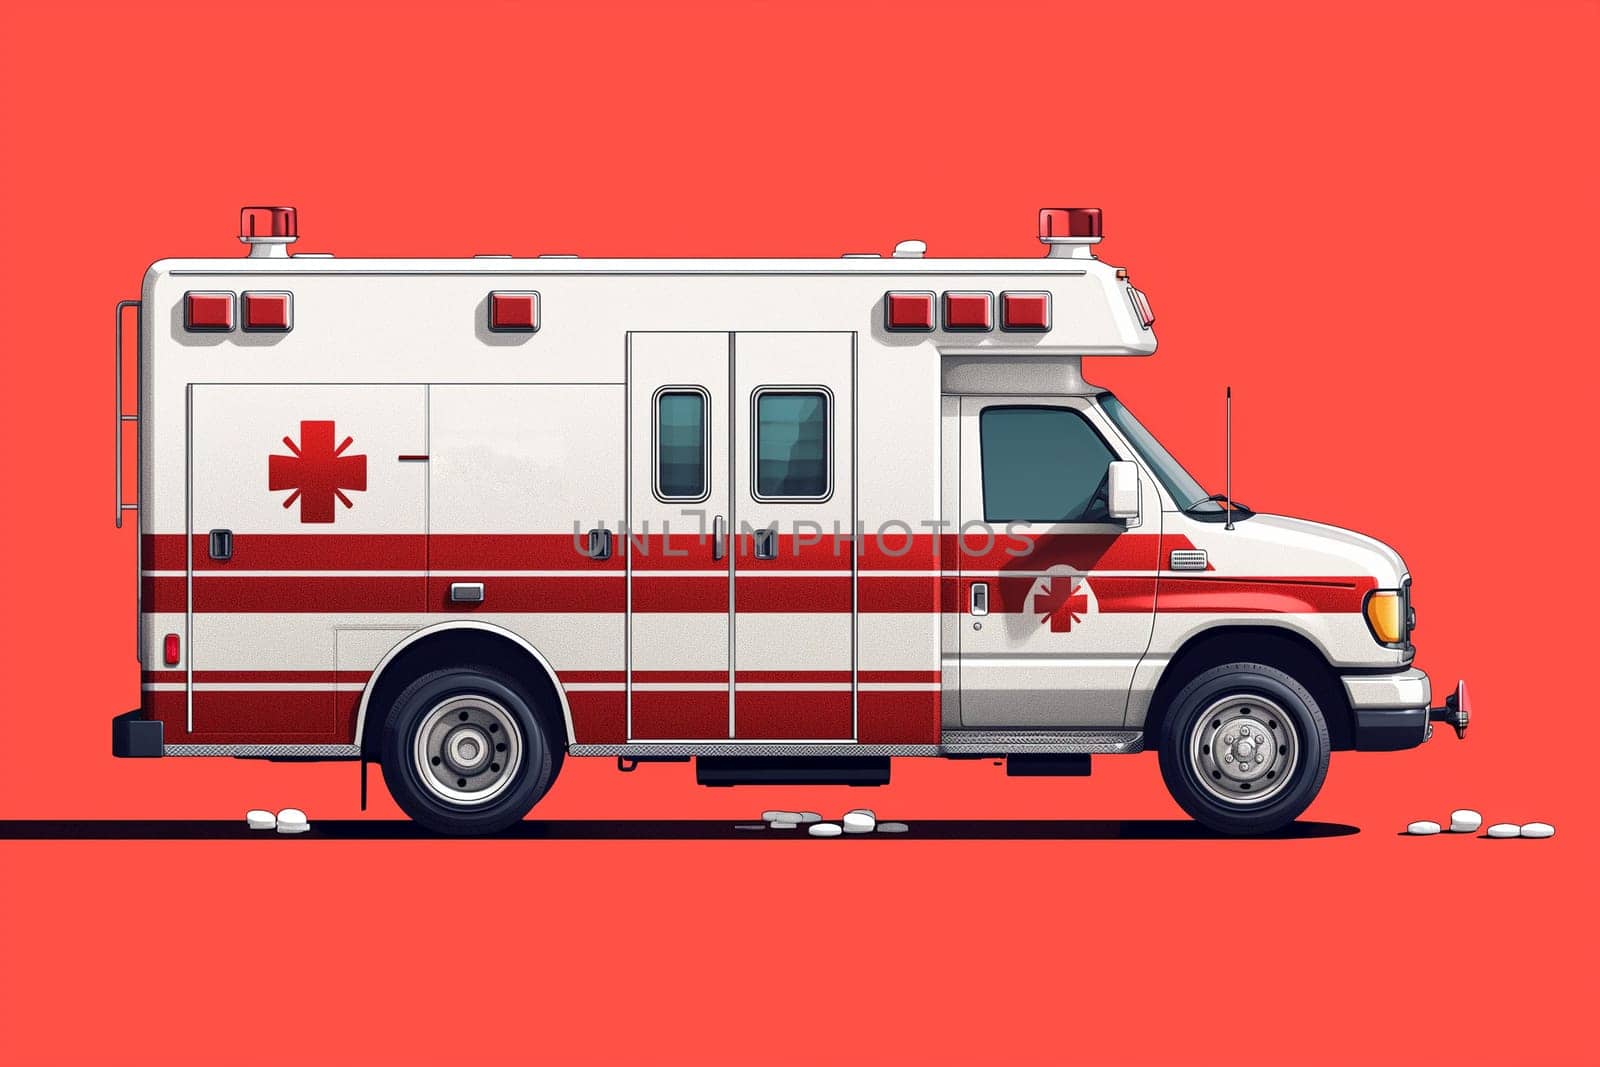 A red and white ambulance stands out against a red background, ready to respond to emergencies. The stark contrast of colors enhances visibility and conveys urgency.